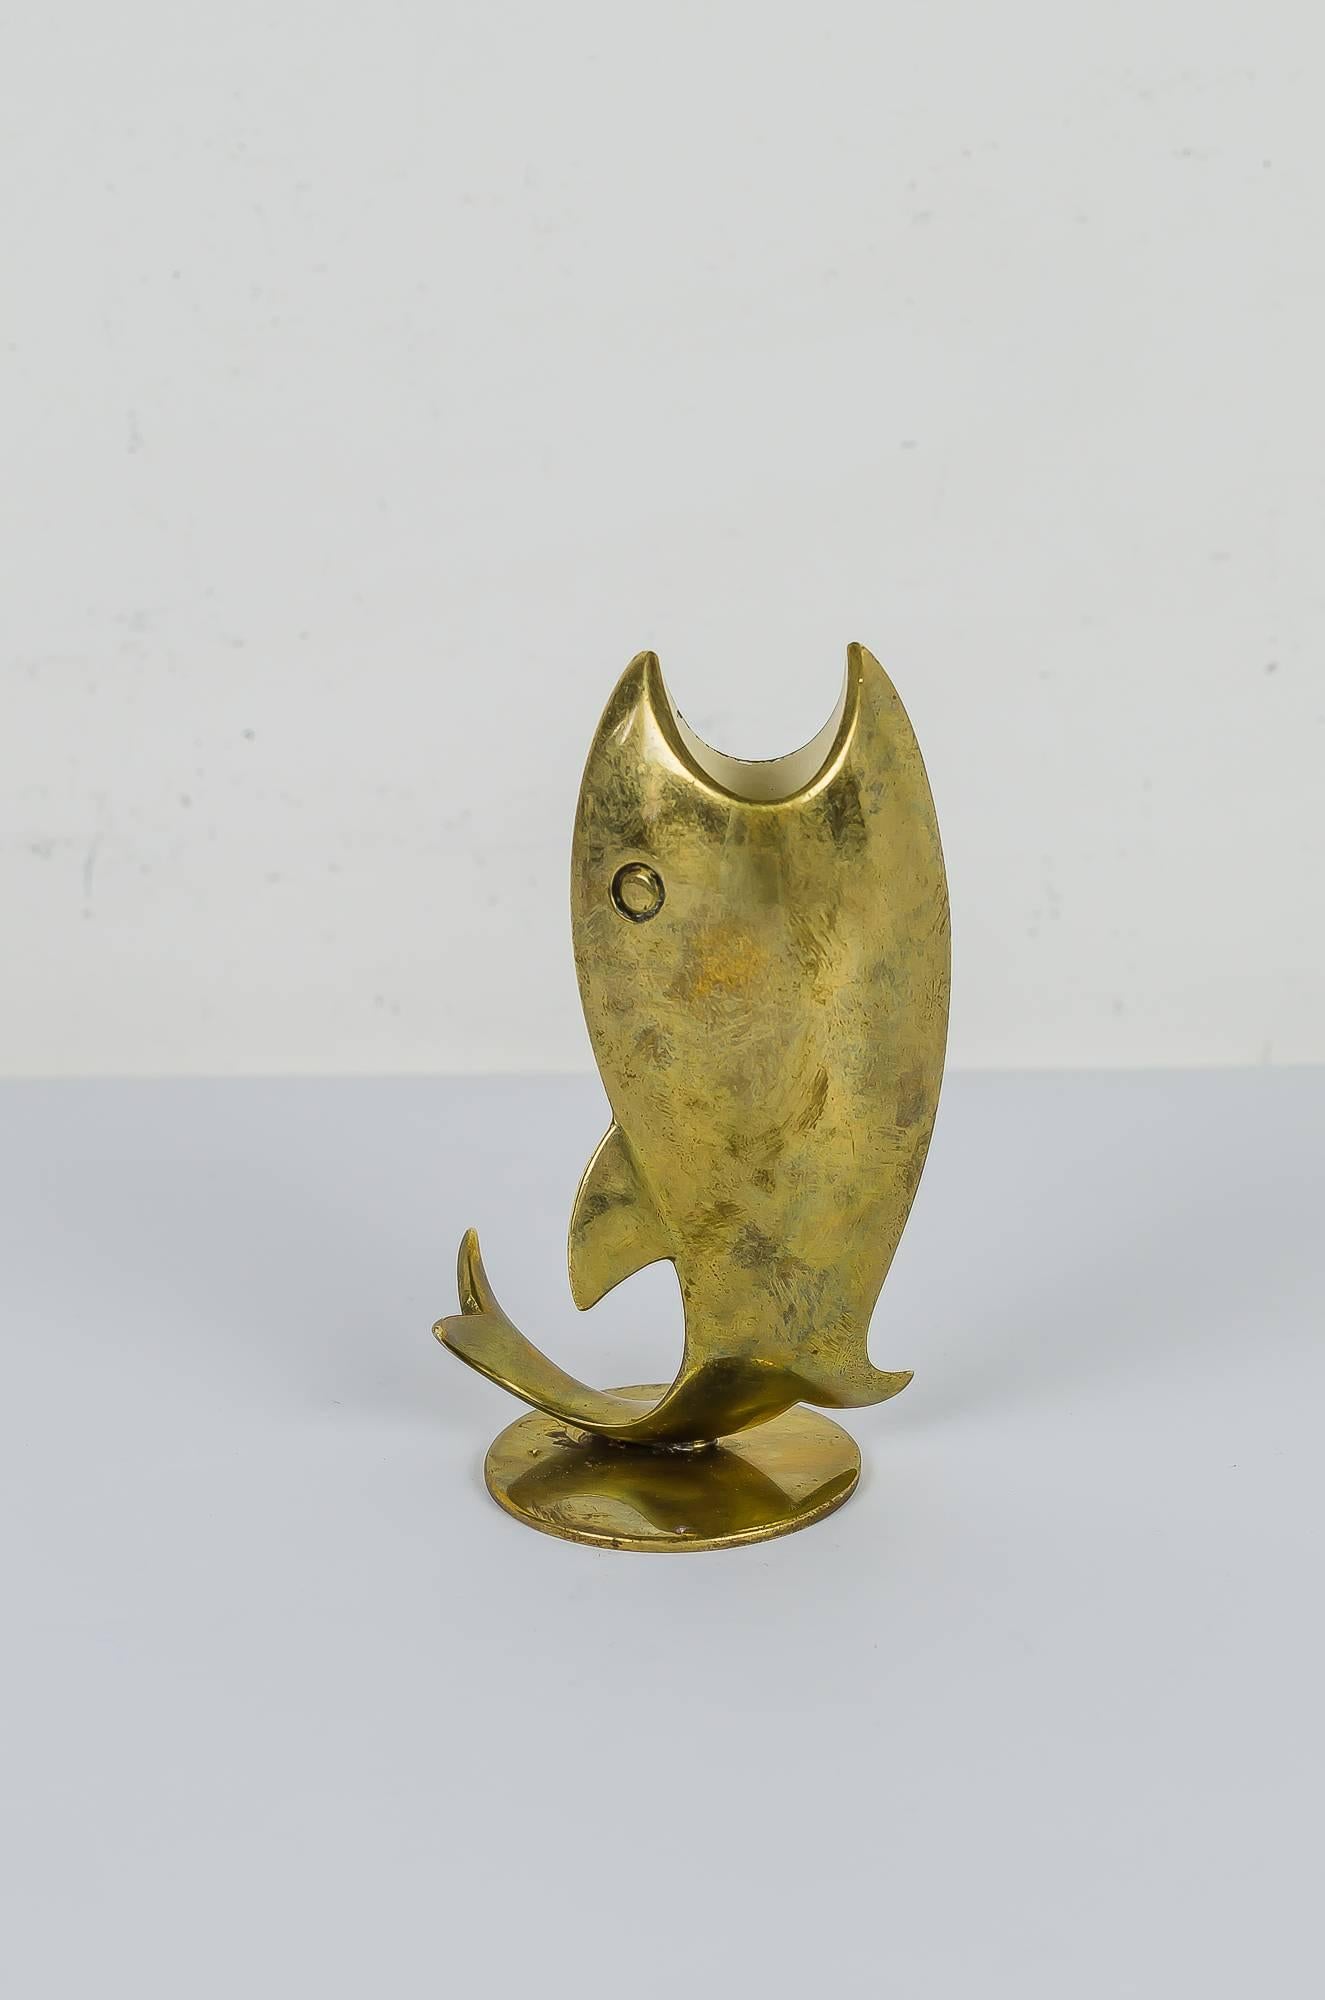 Candle Holder by Richard Rohac around 1950s
Original condition